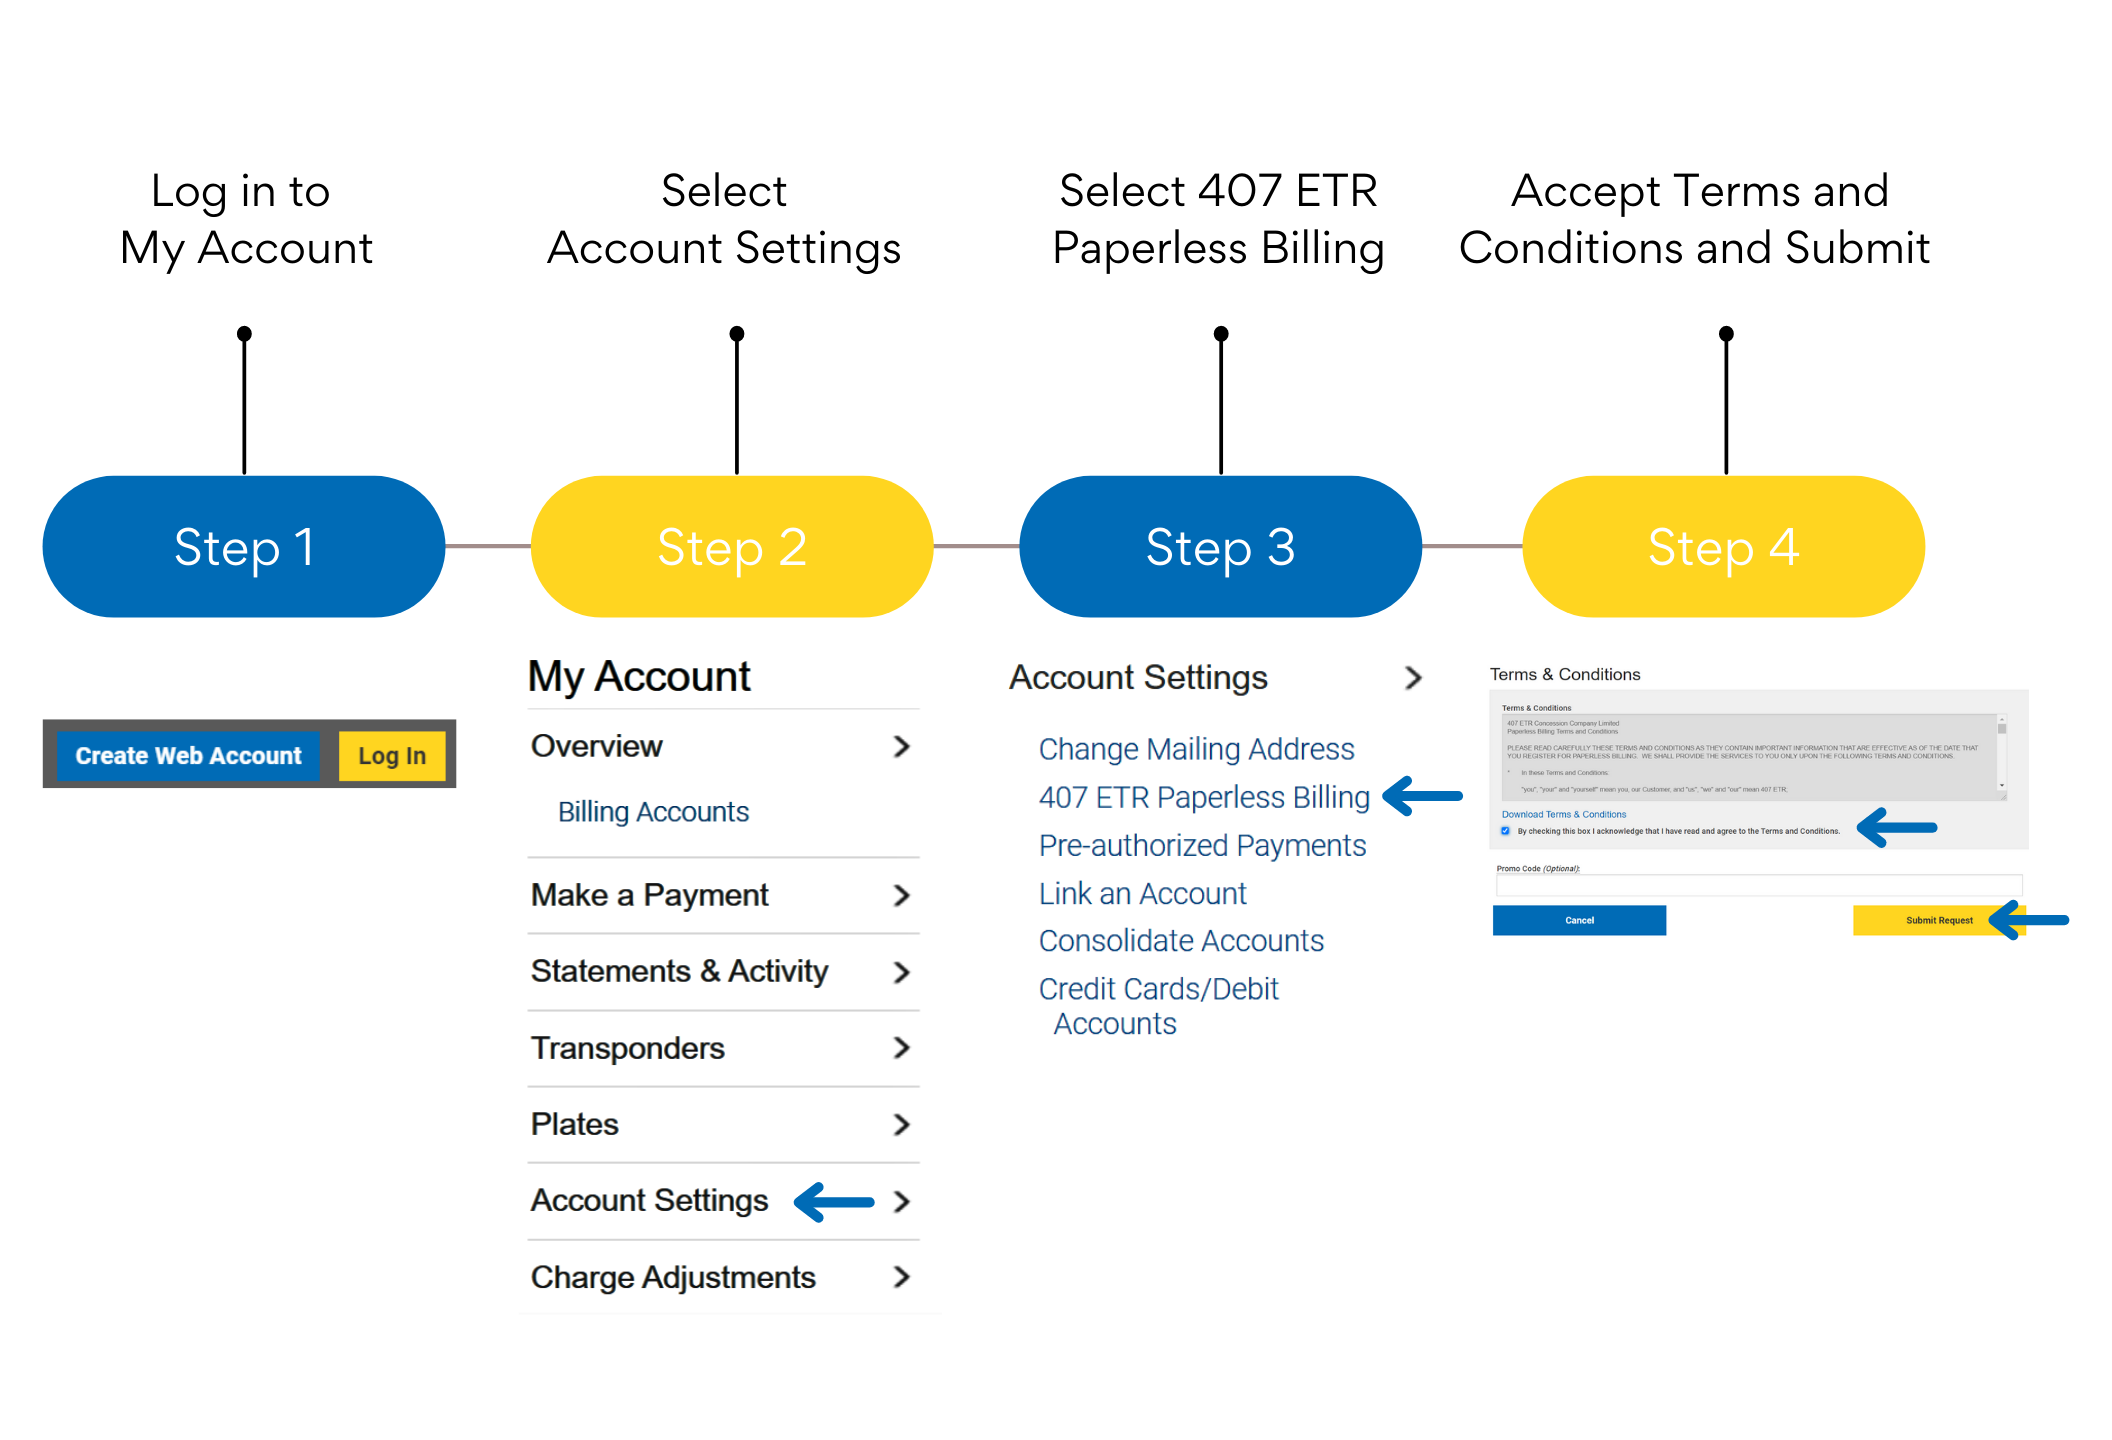 Sign up for paperless billing in four easy steps